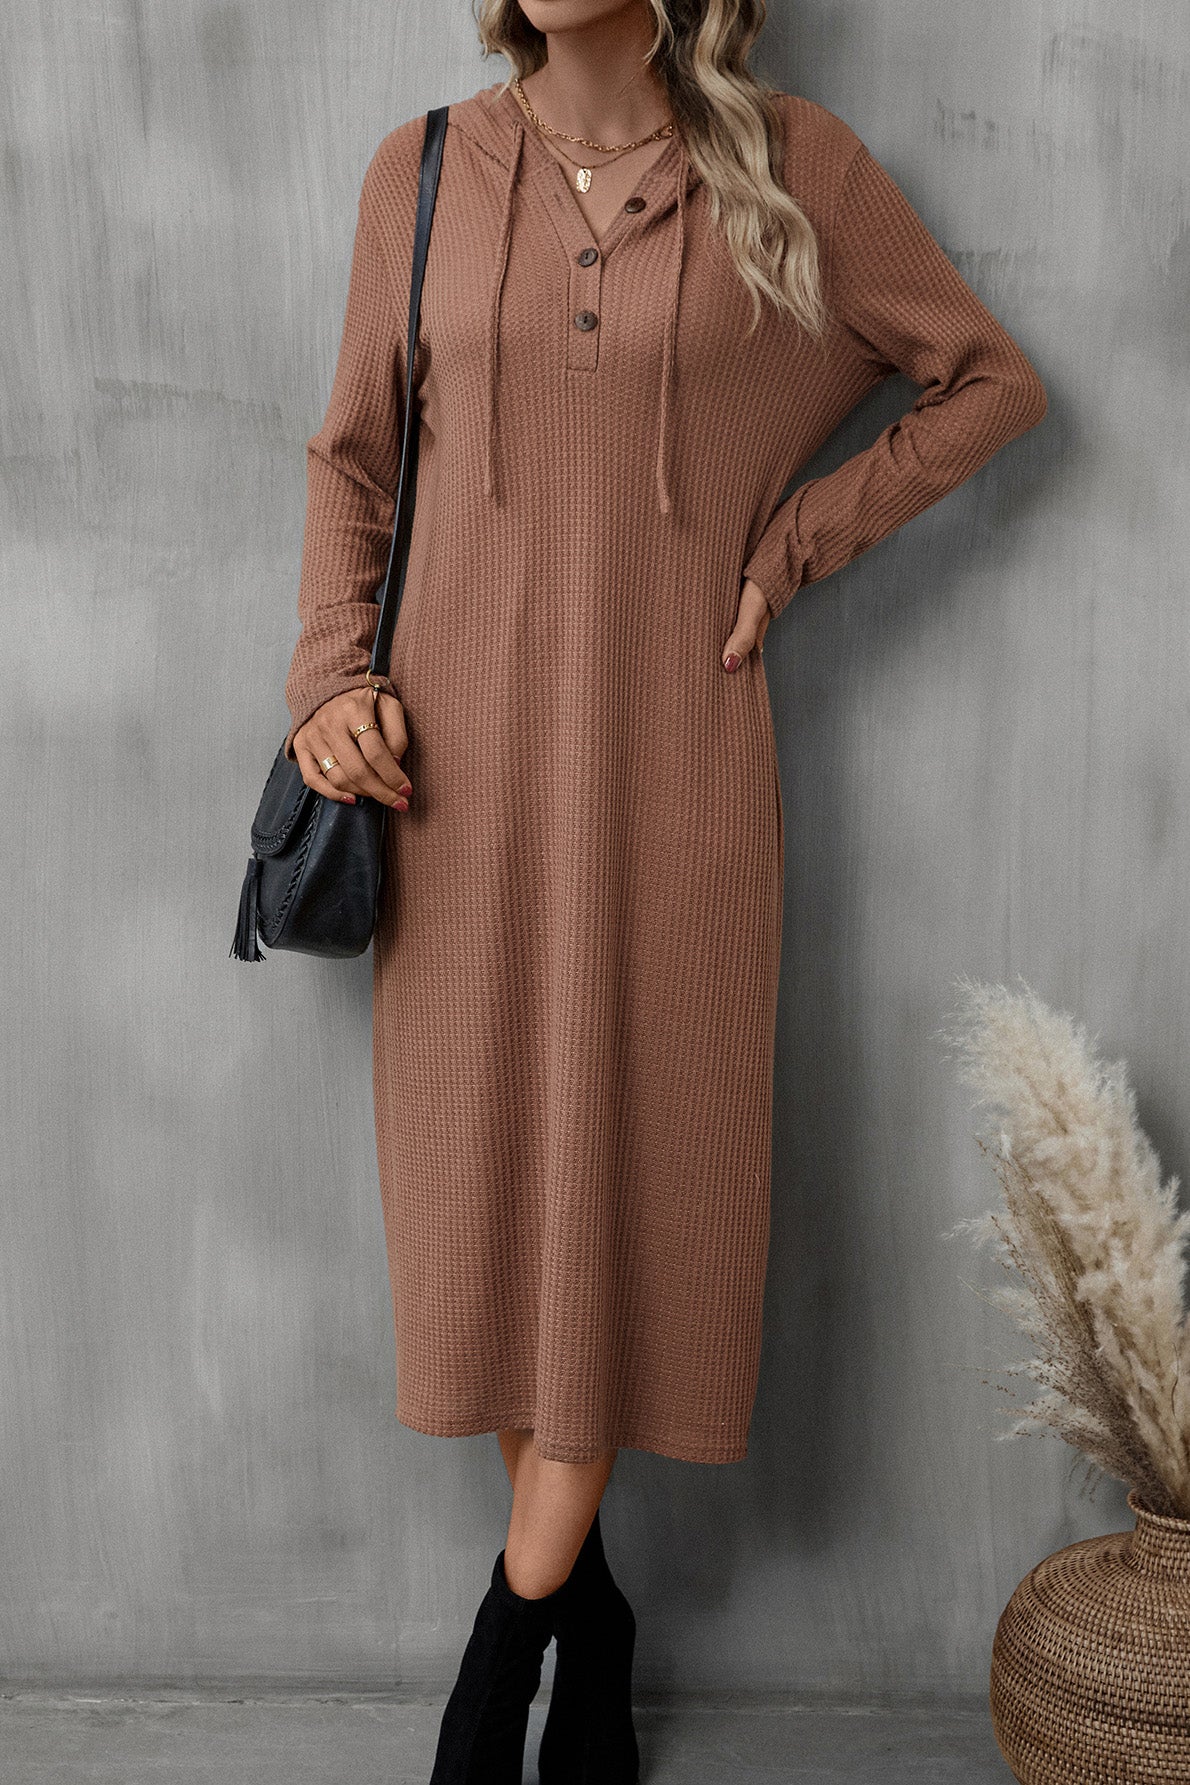 Buttoned Long Sleeve Hooded Dress